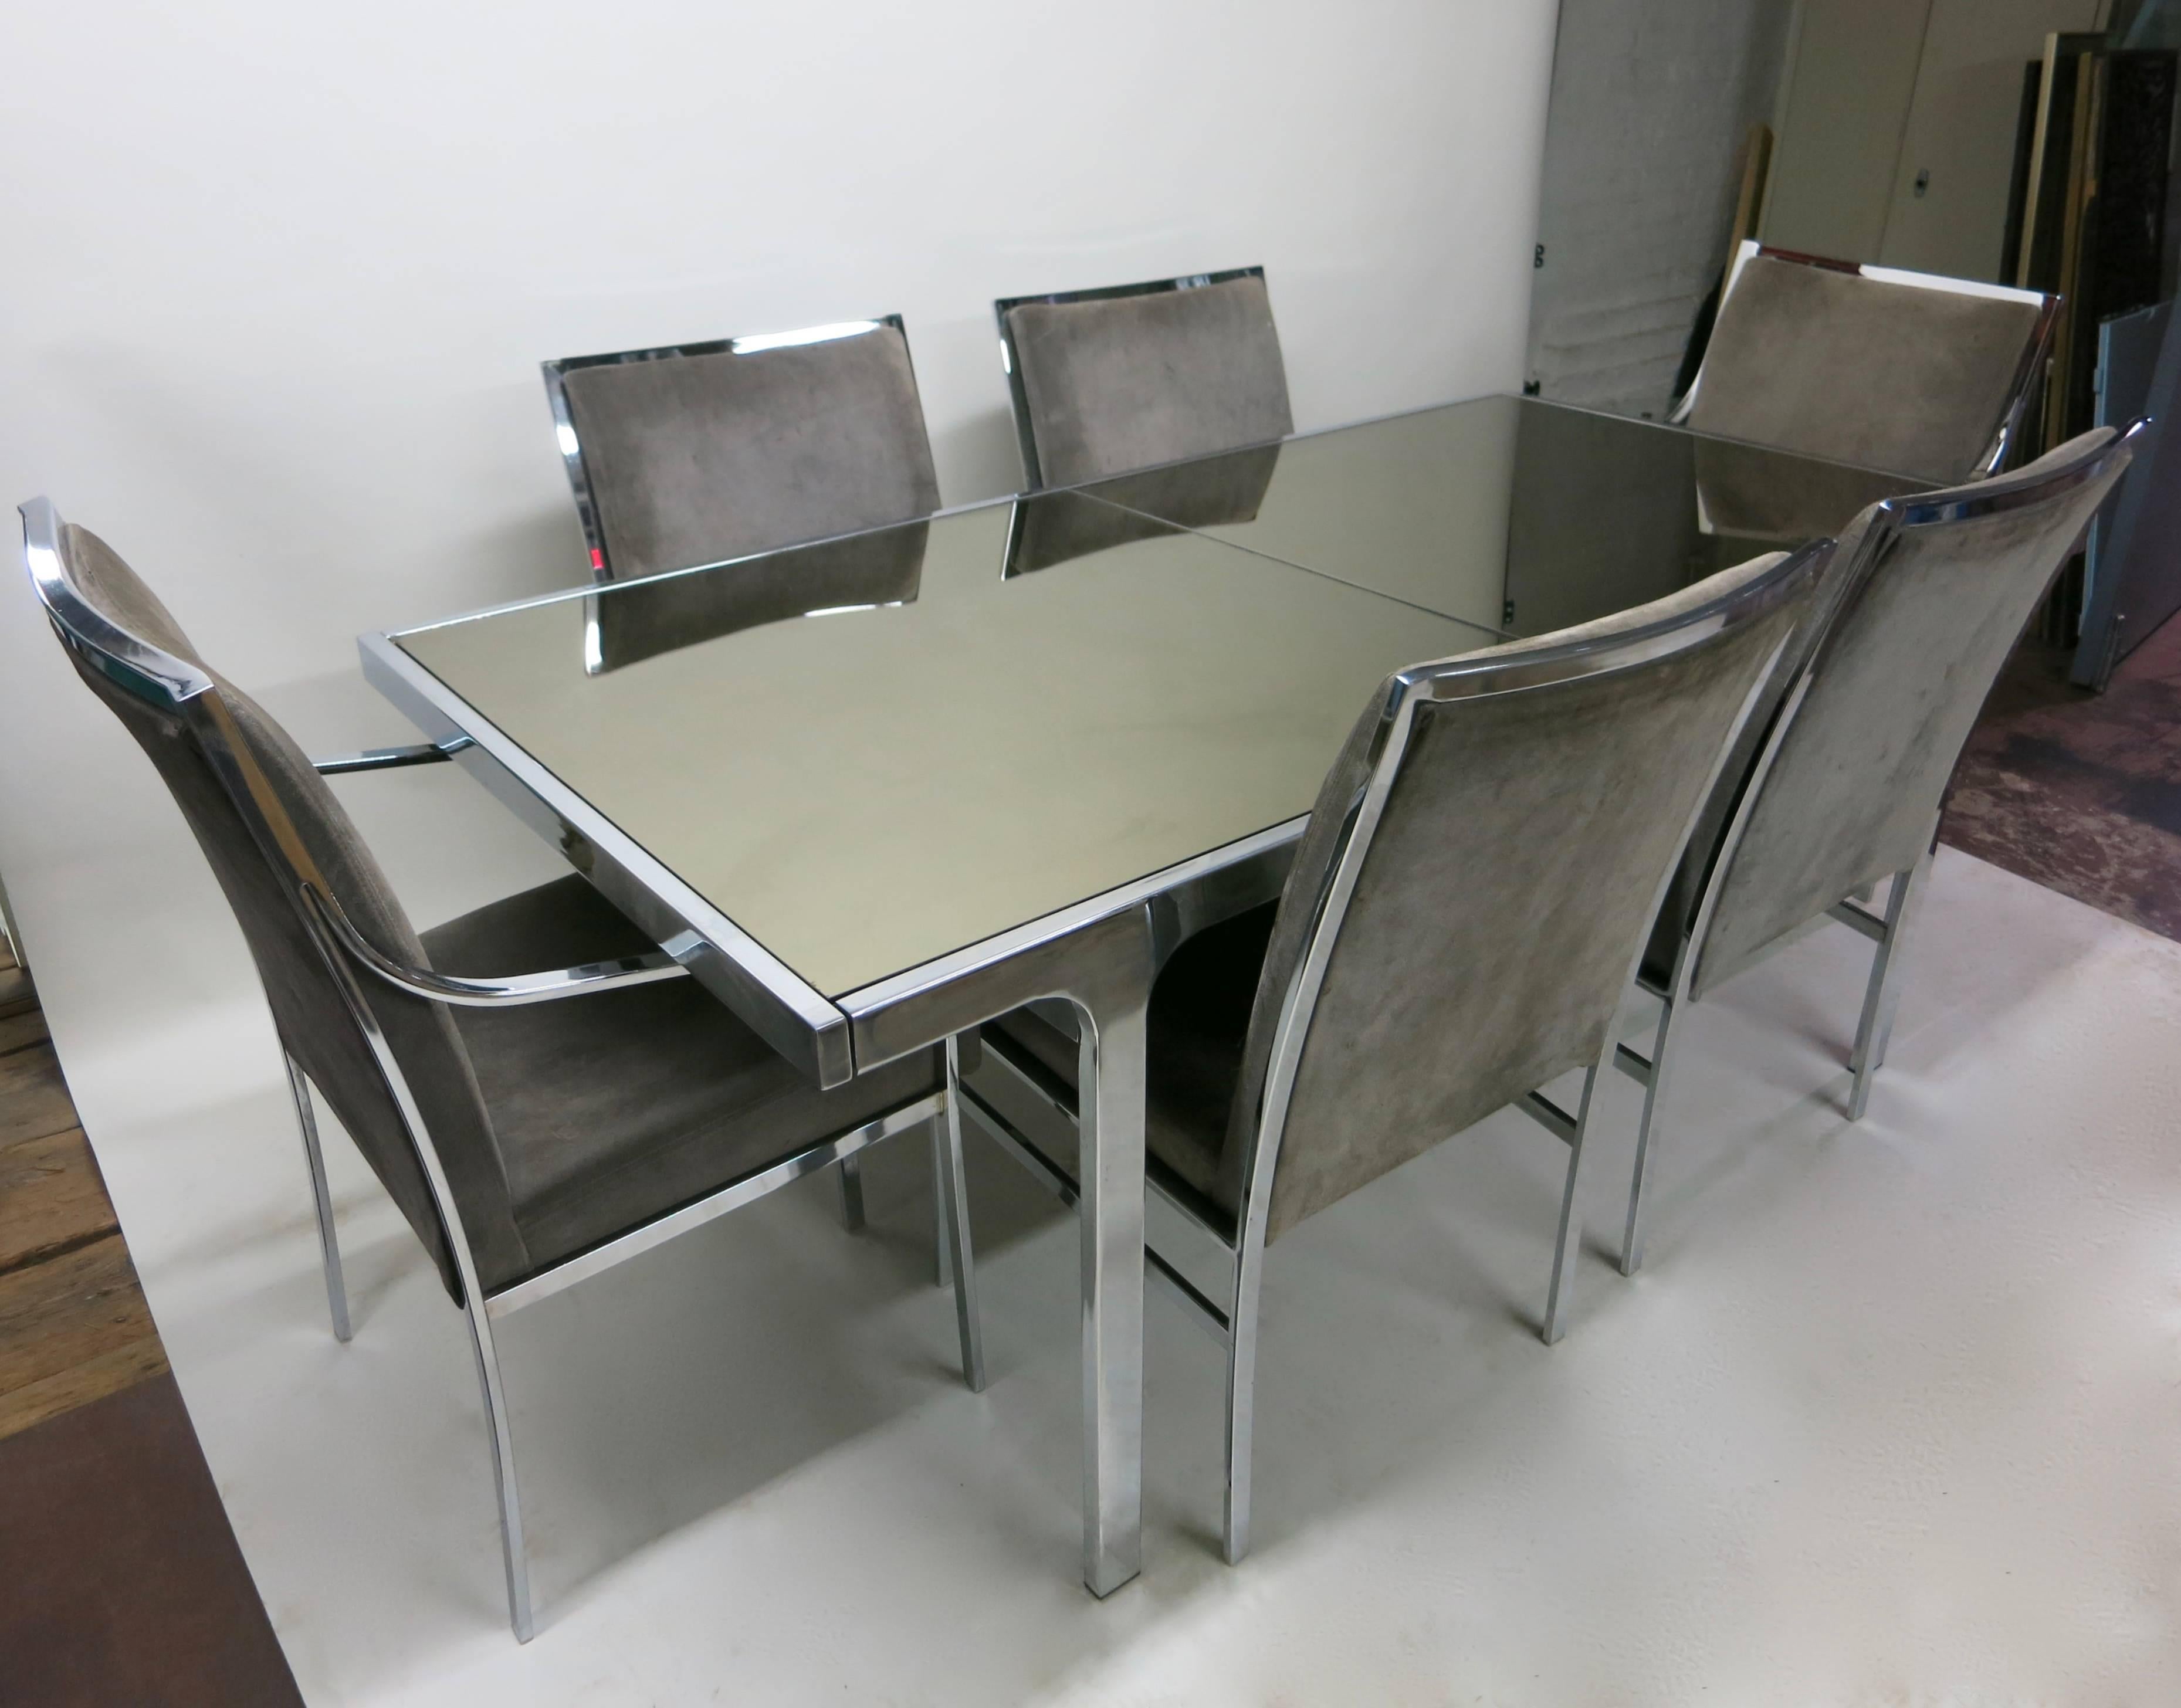 Dining Table with Six chairs designed and signed Pierre Cardin. A mirrored glass and steel table with built in single leaf extension that stows under the top.
The sleek set of chrome chairs has been with the table since original purchase in 1977.